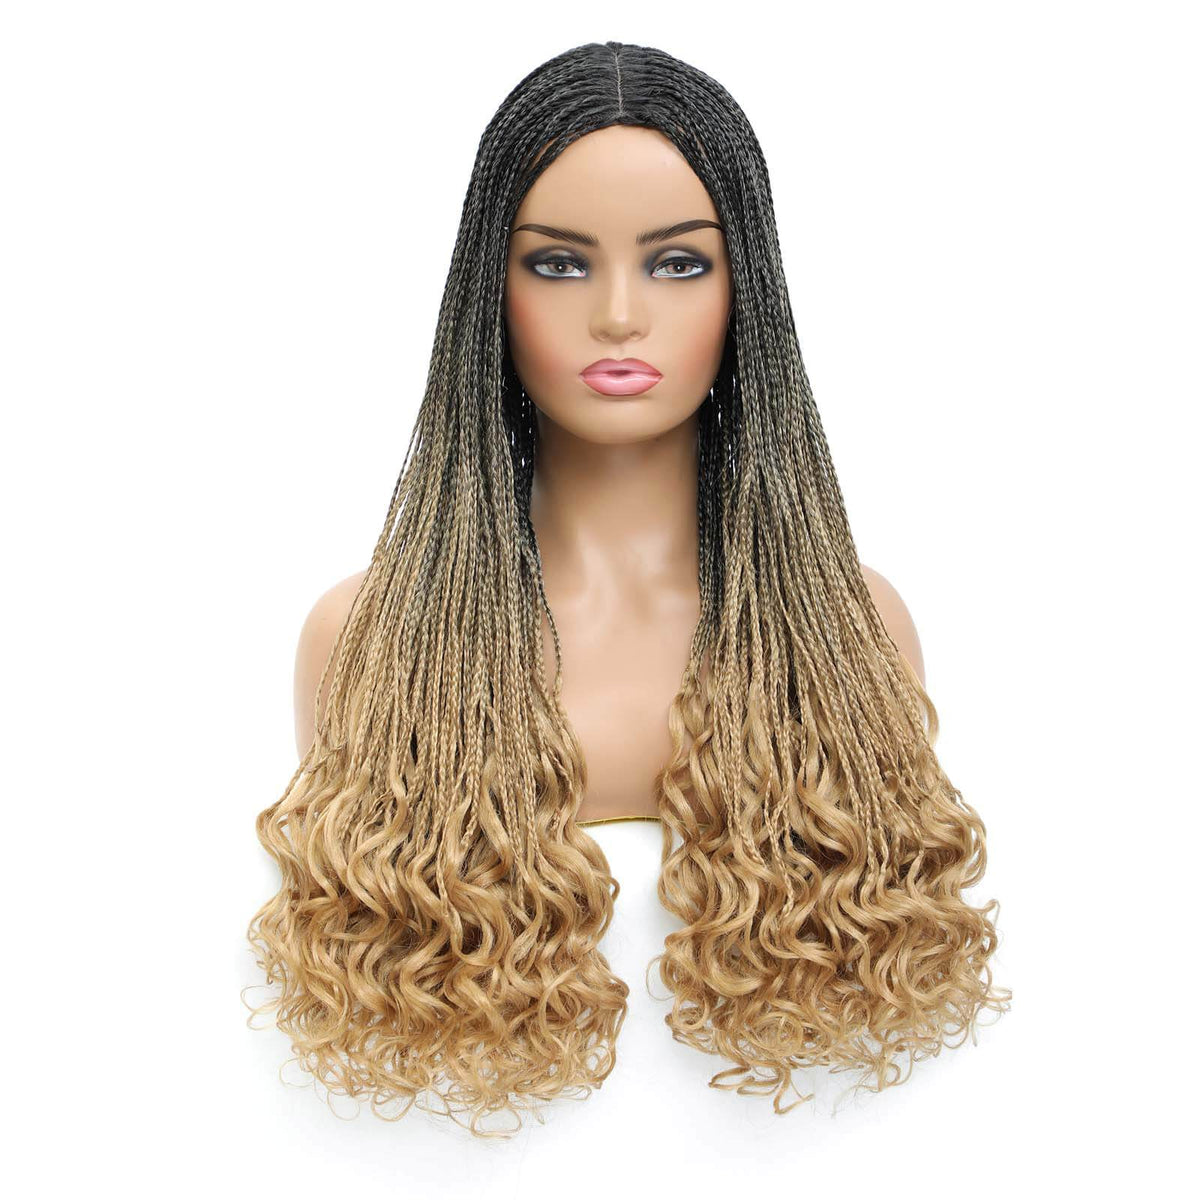 Box Braided Wig with Goddess Curly Ends Ombre Blonde #27 Color Right Front Show